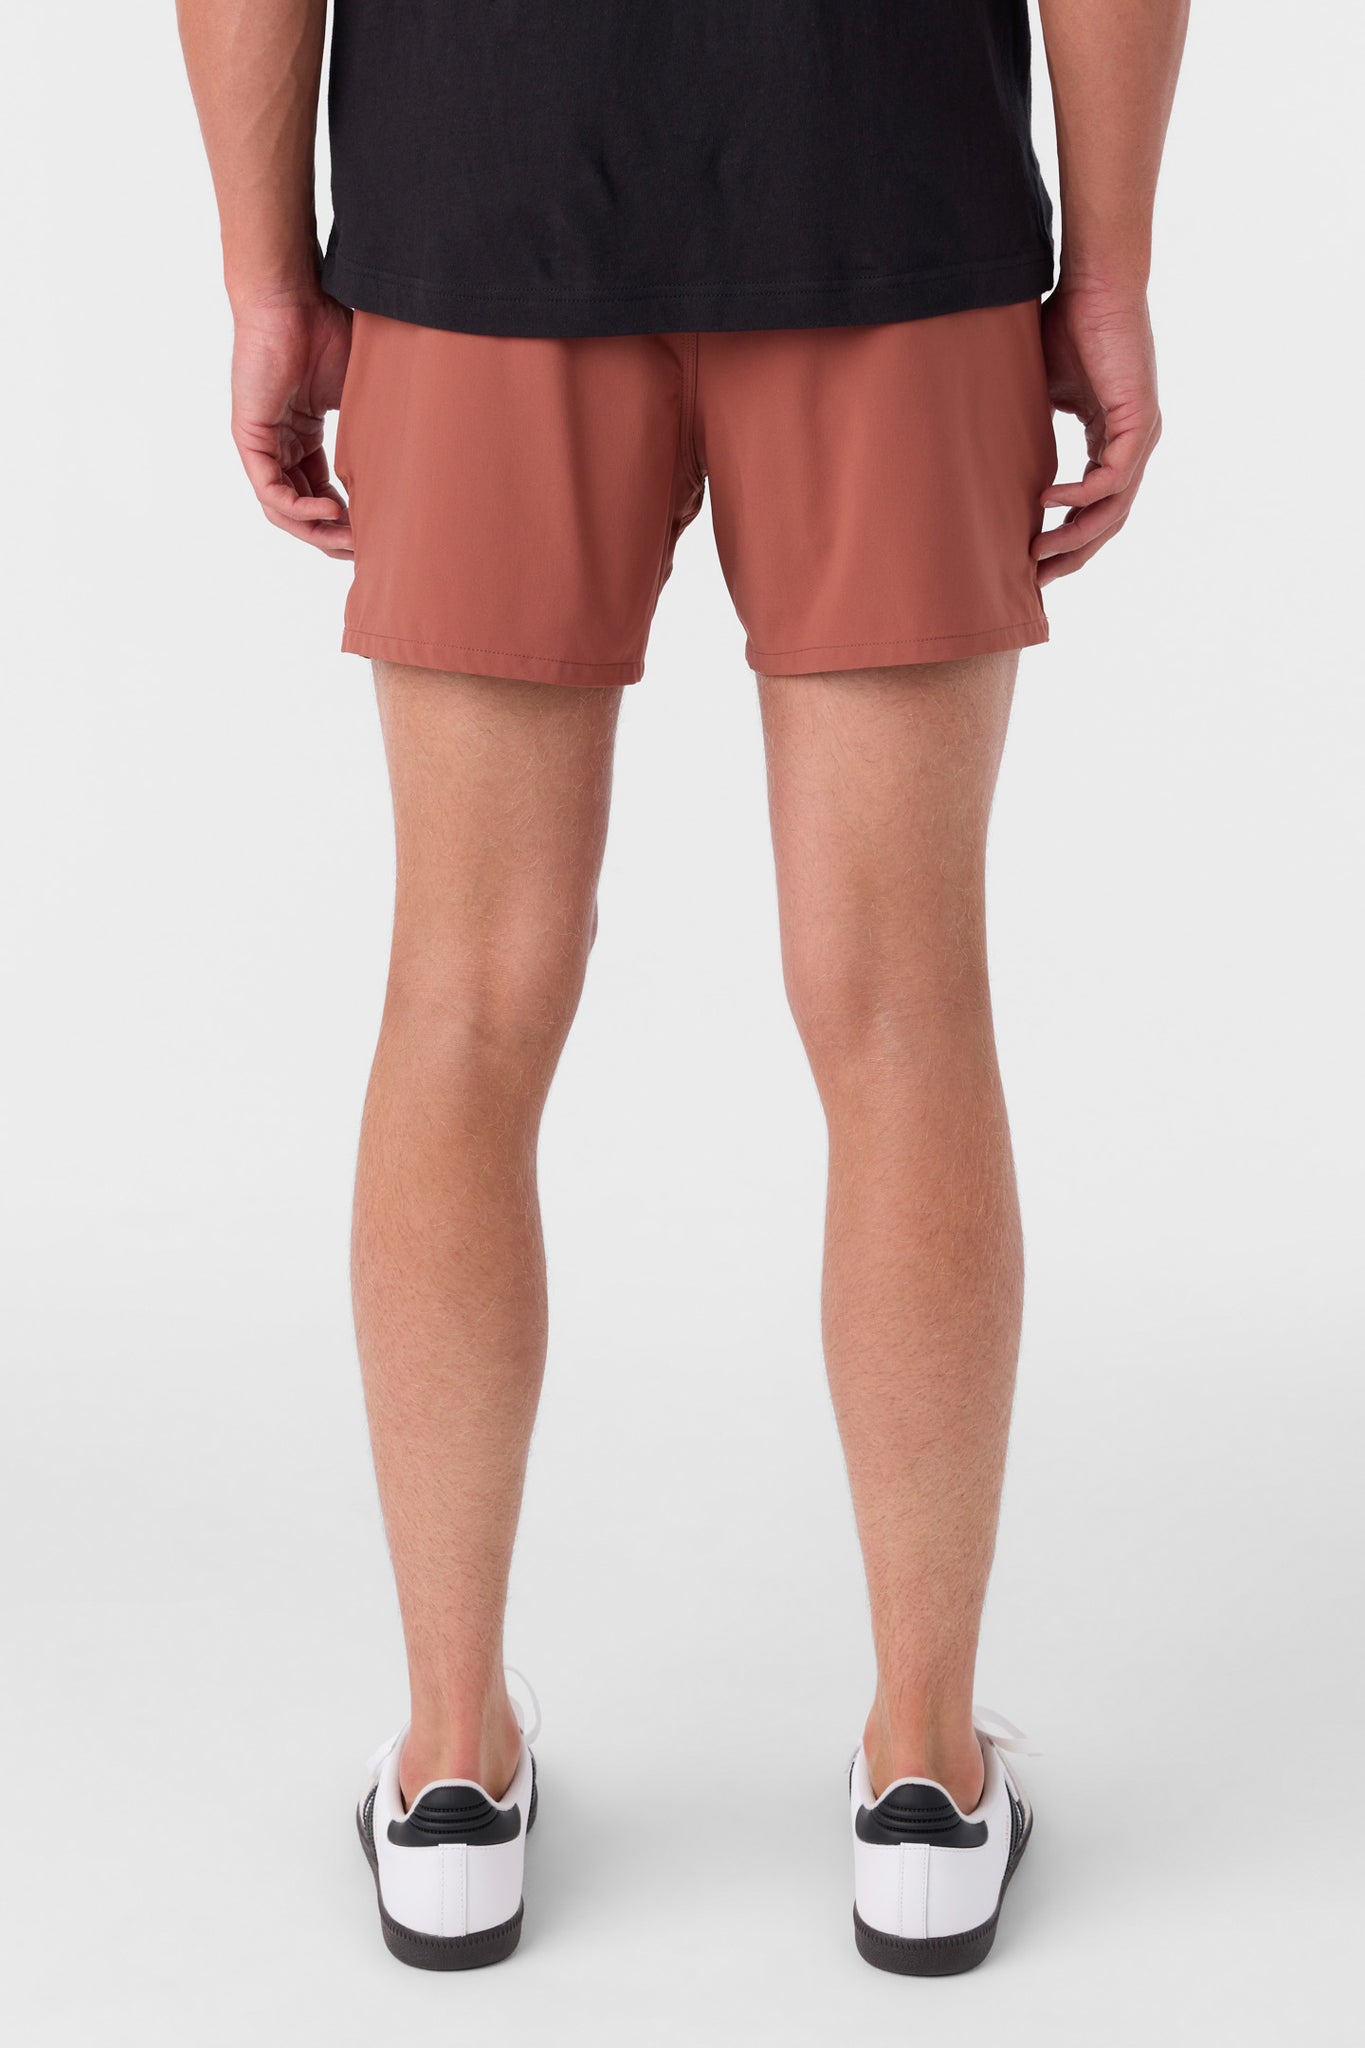 PERFORM LINED 15" ATHLETIC SHORTS